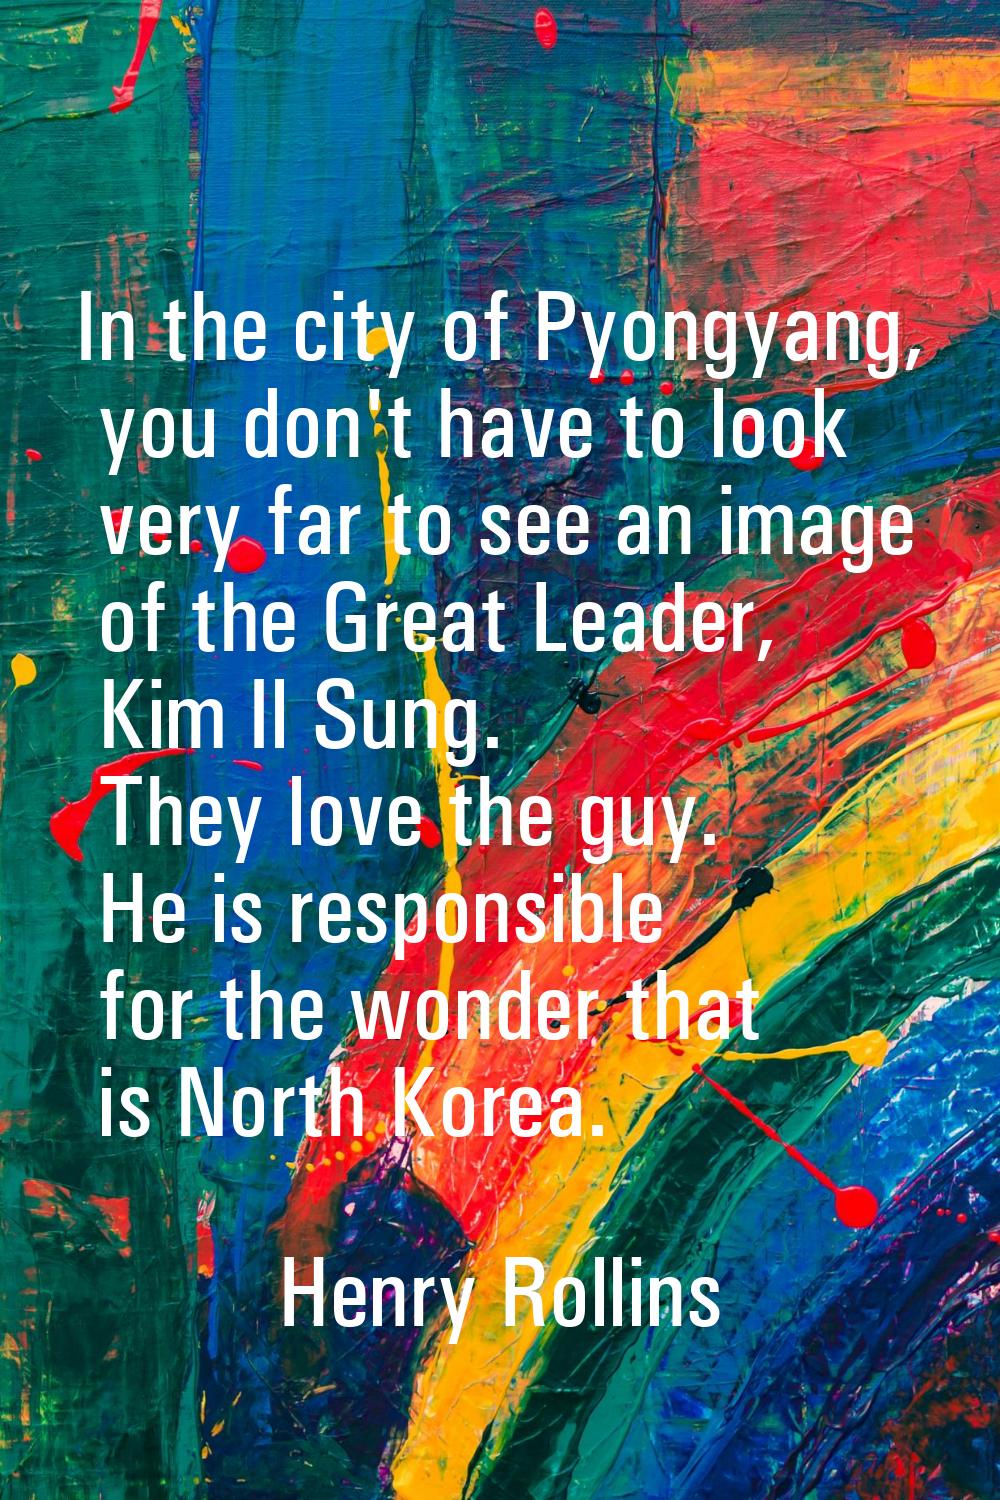 In the city of Pyongyang, you don't have to look very far to see an image of the Great Leader, Kim 